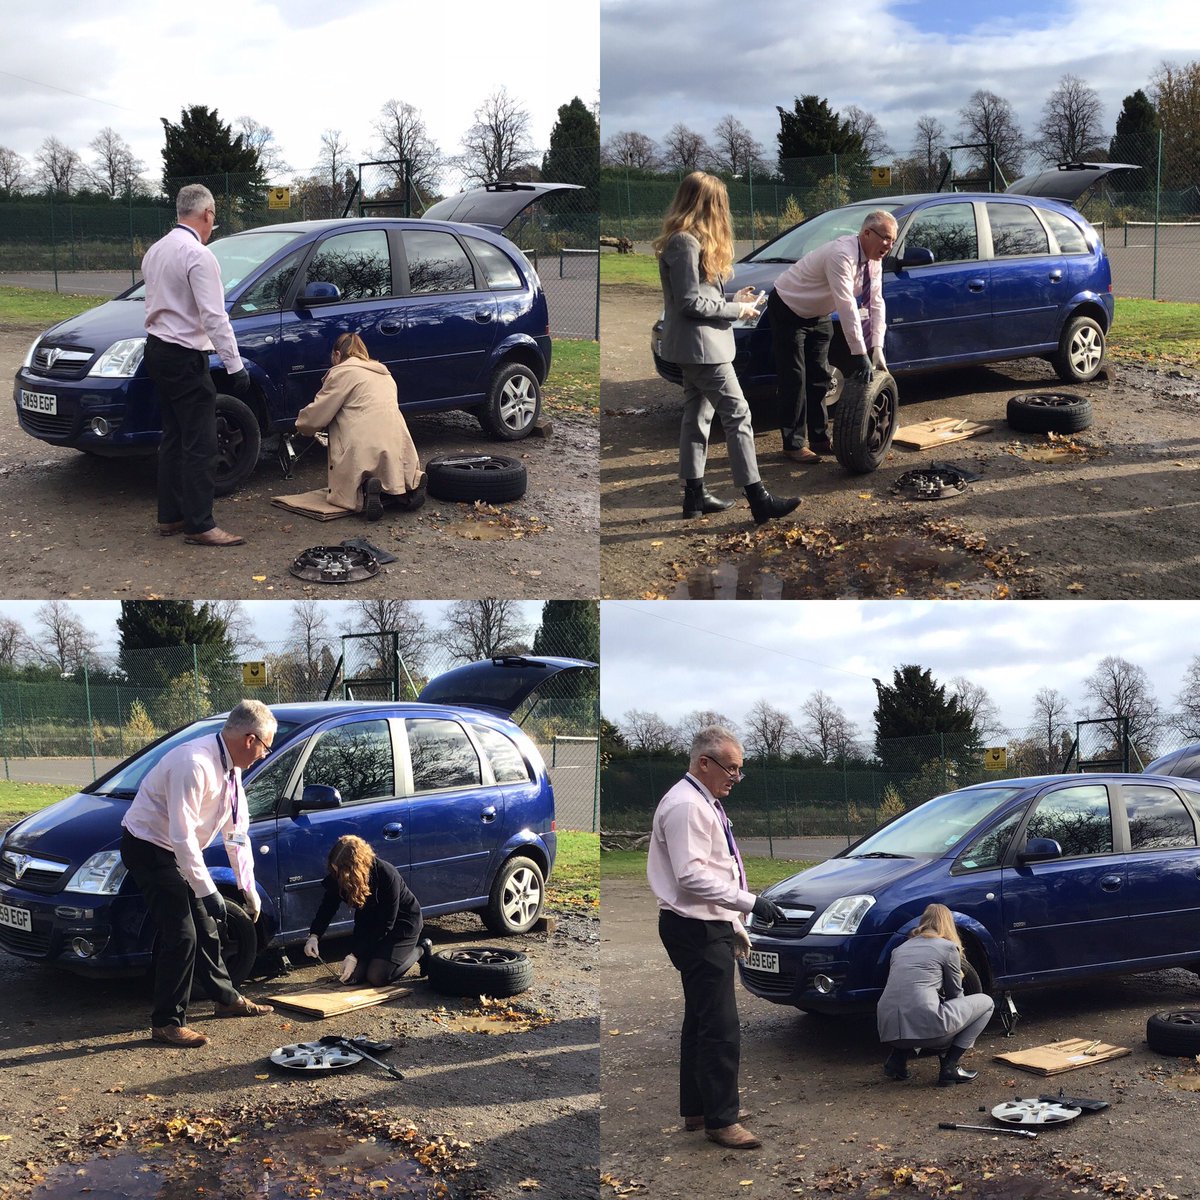 Flat tyre on the way to a job interview? In #periodx as part of their car maintenance programme, our #sixthformers practised changing a tyre & found out what essential kit they should always have in the boot - including the piece of cardboard for kneeling on when changing a tyre!